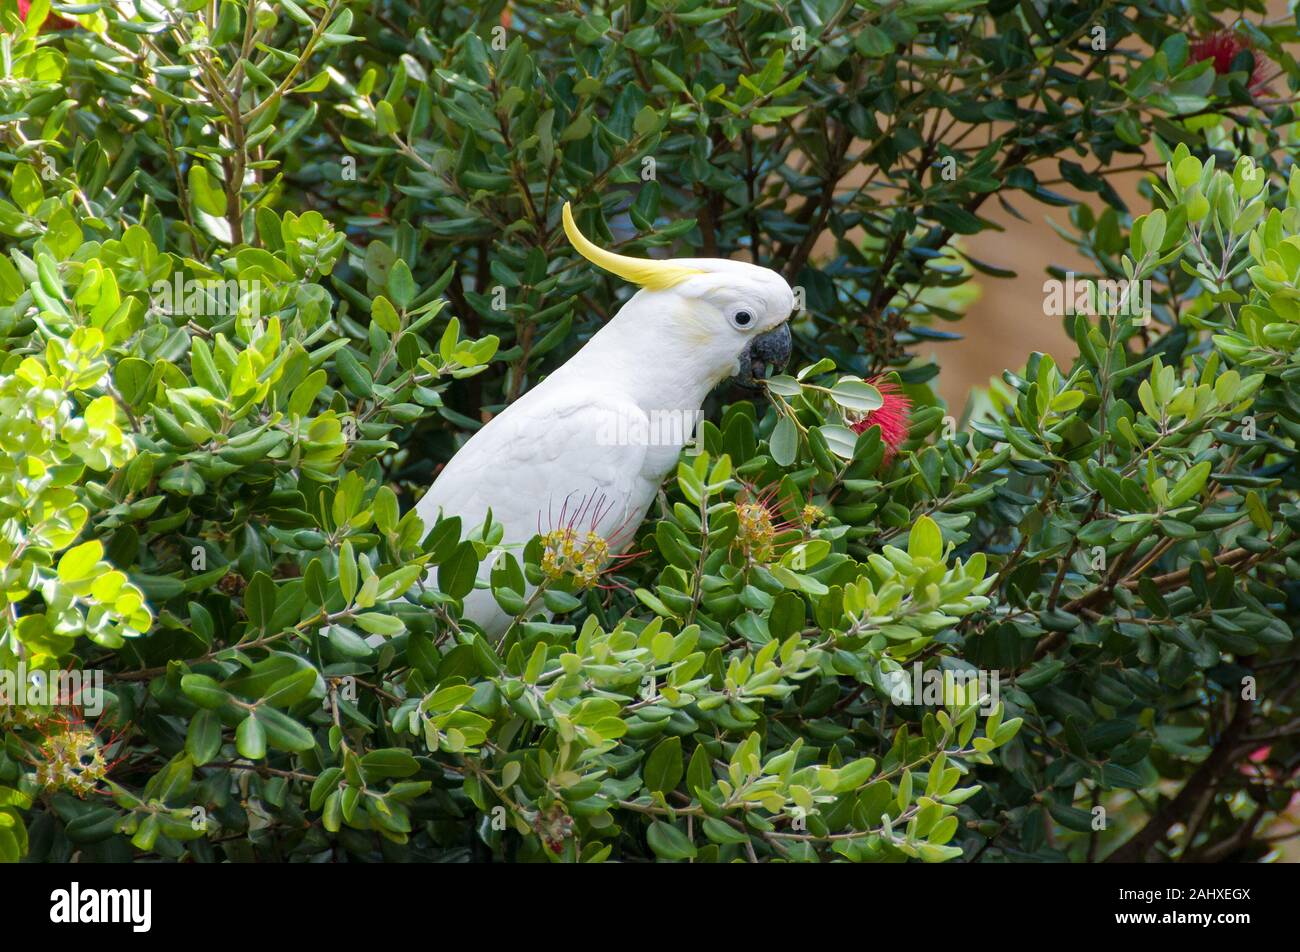 TEST, Cockatoo parrot bird on banksia tree eating red flowers Stock Photo